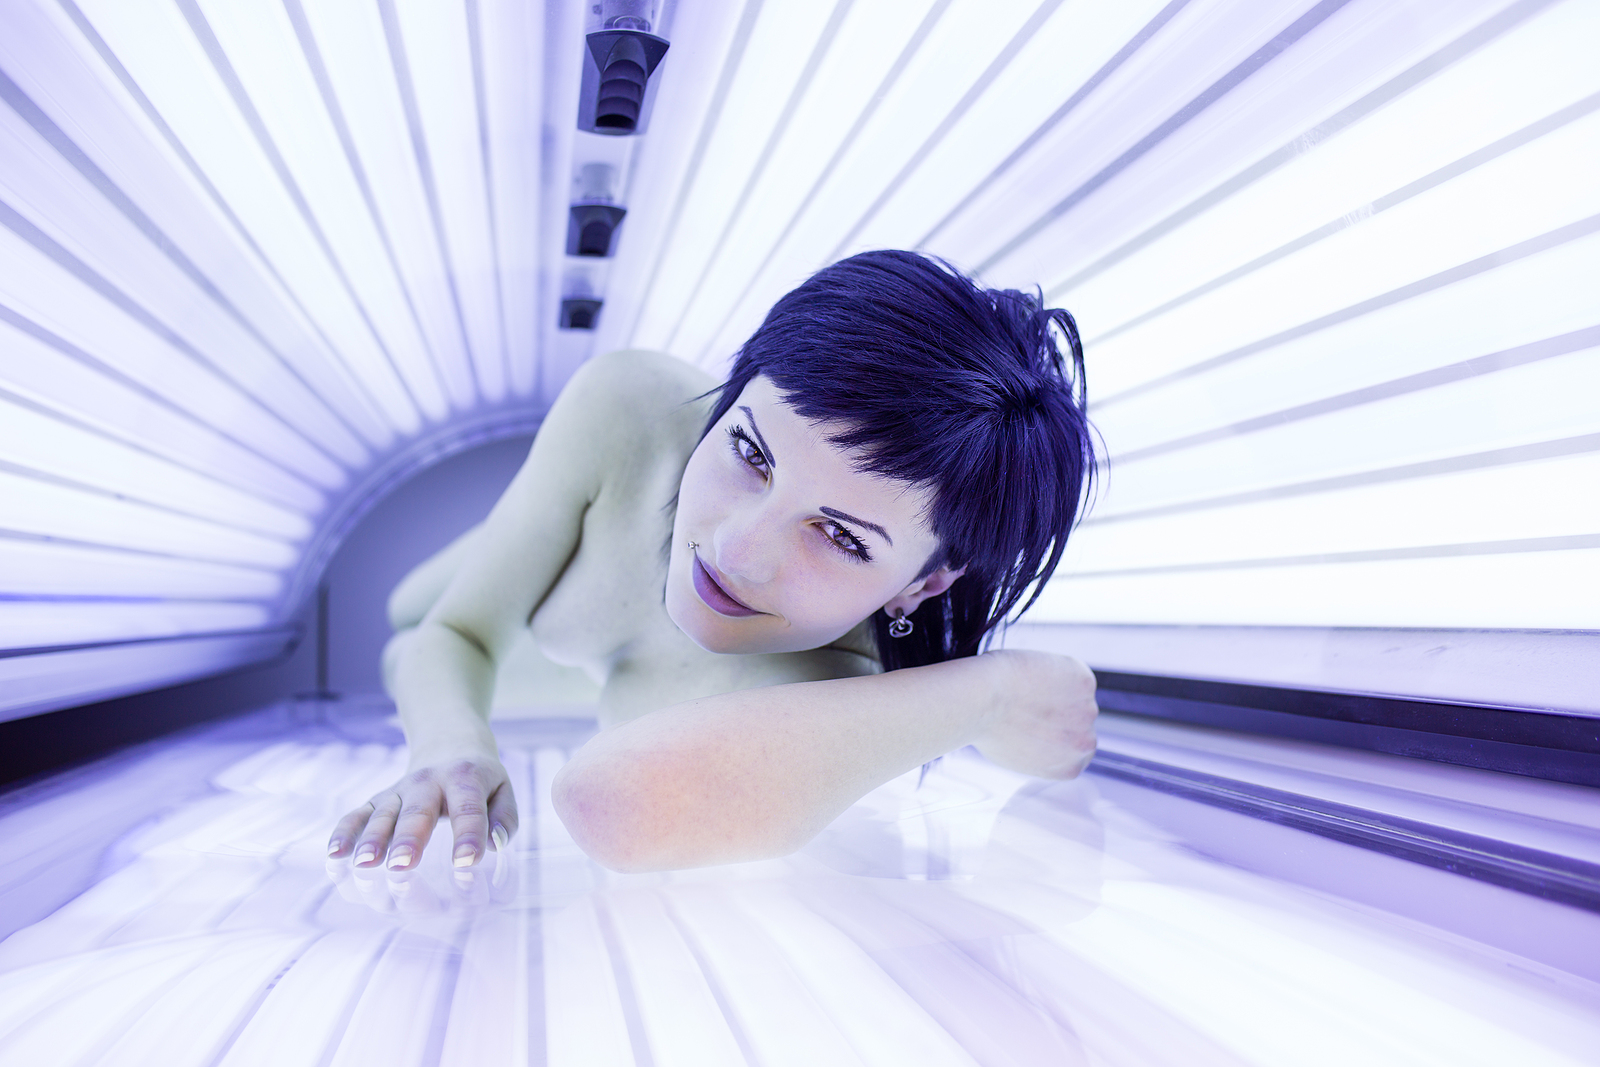 adrine williams add nude women in tanning beds photo